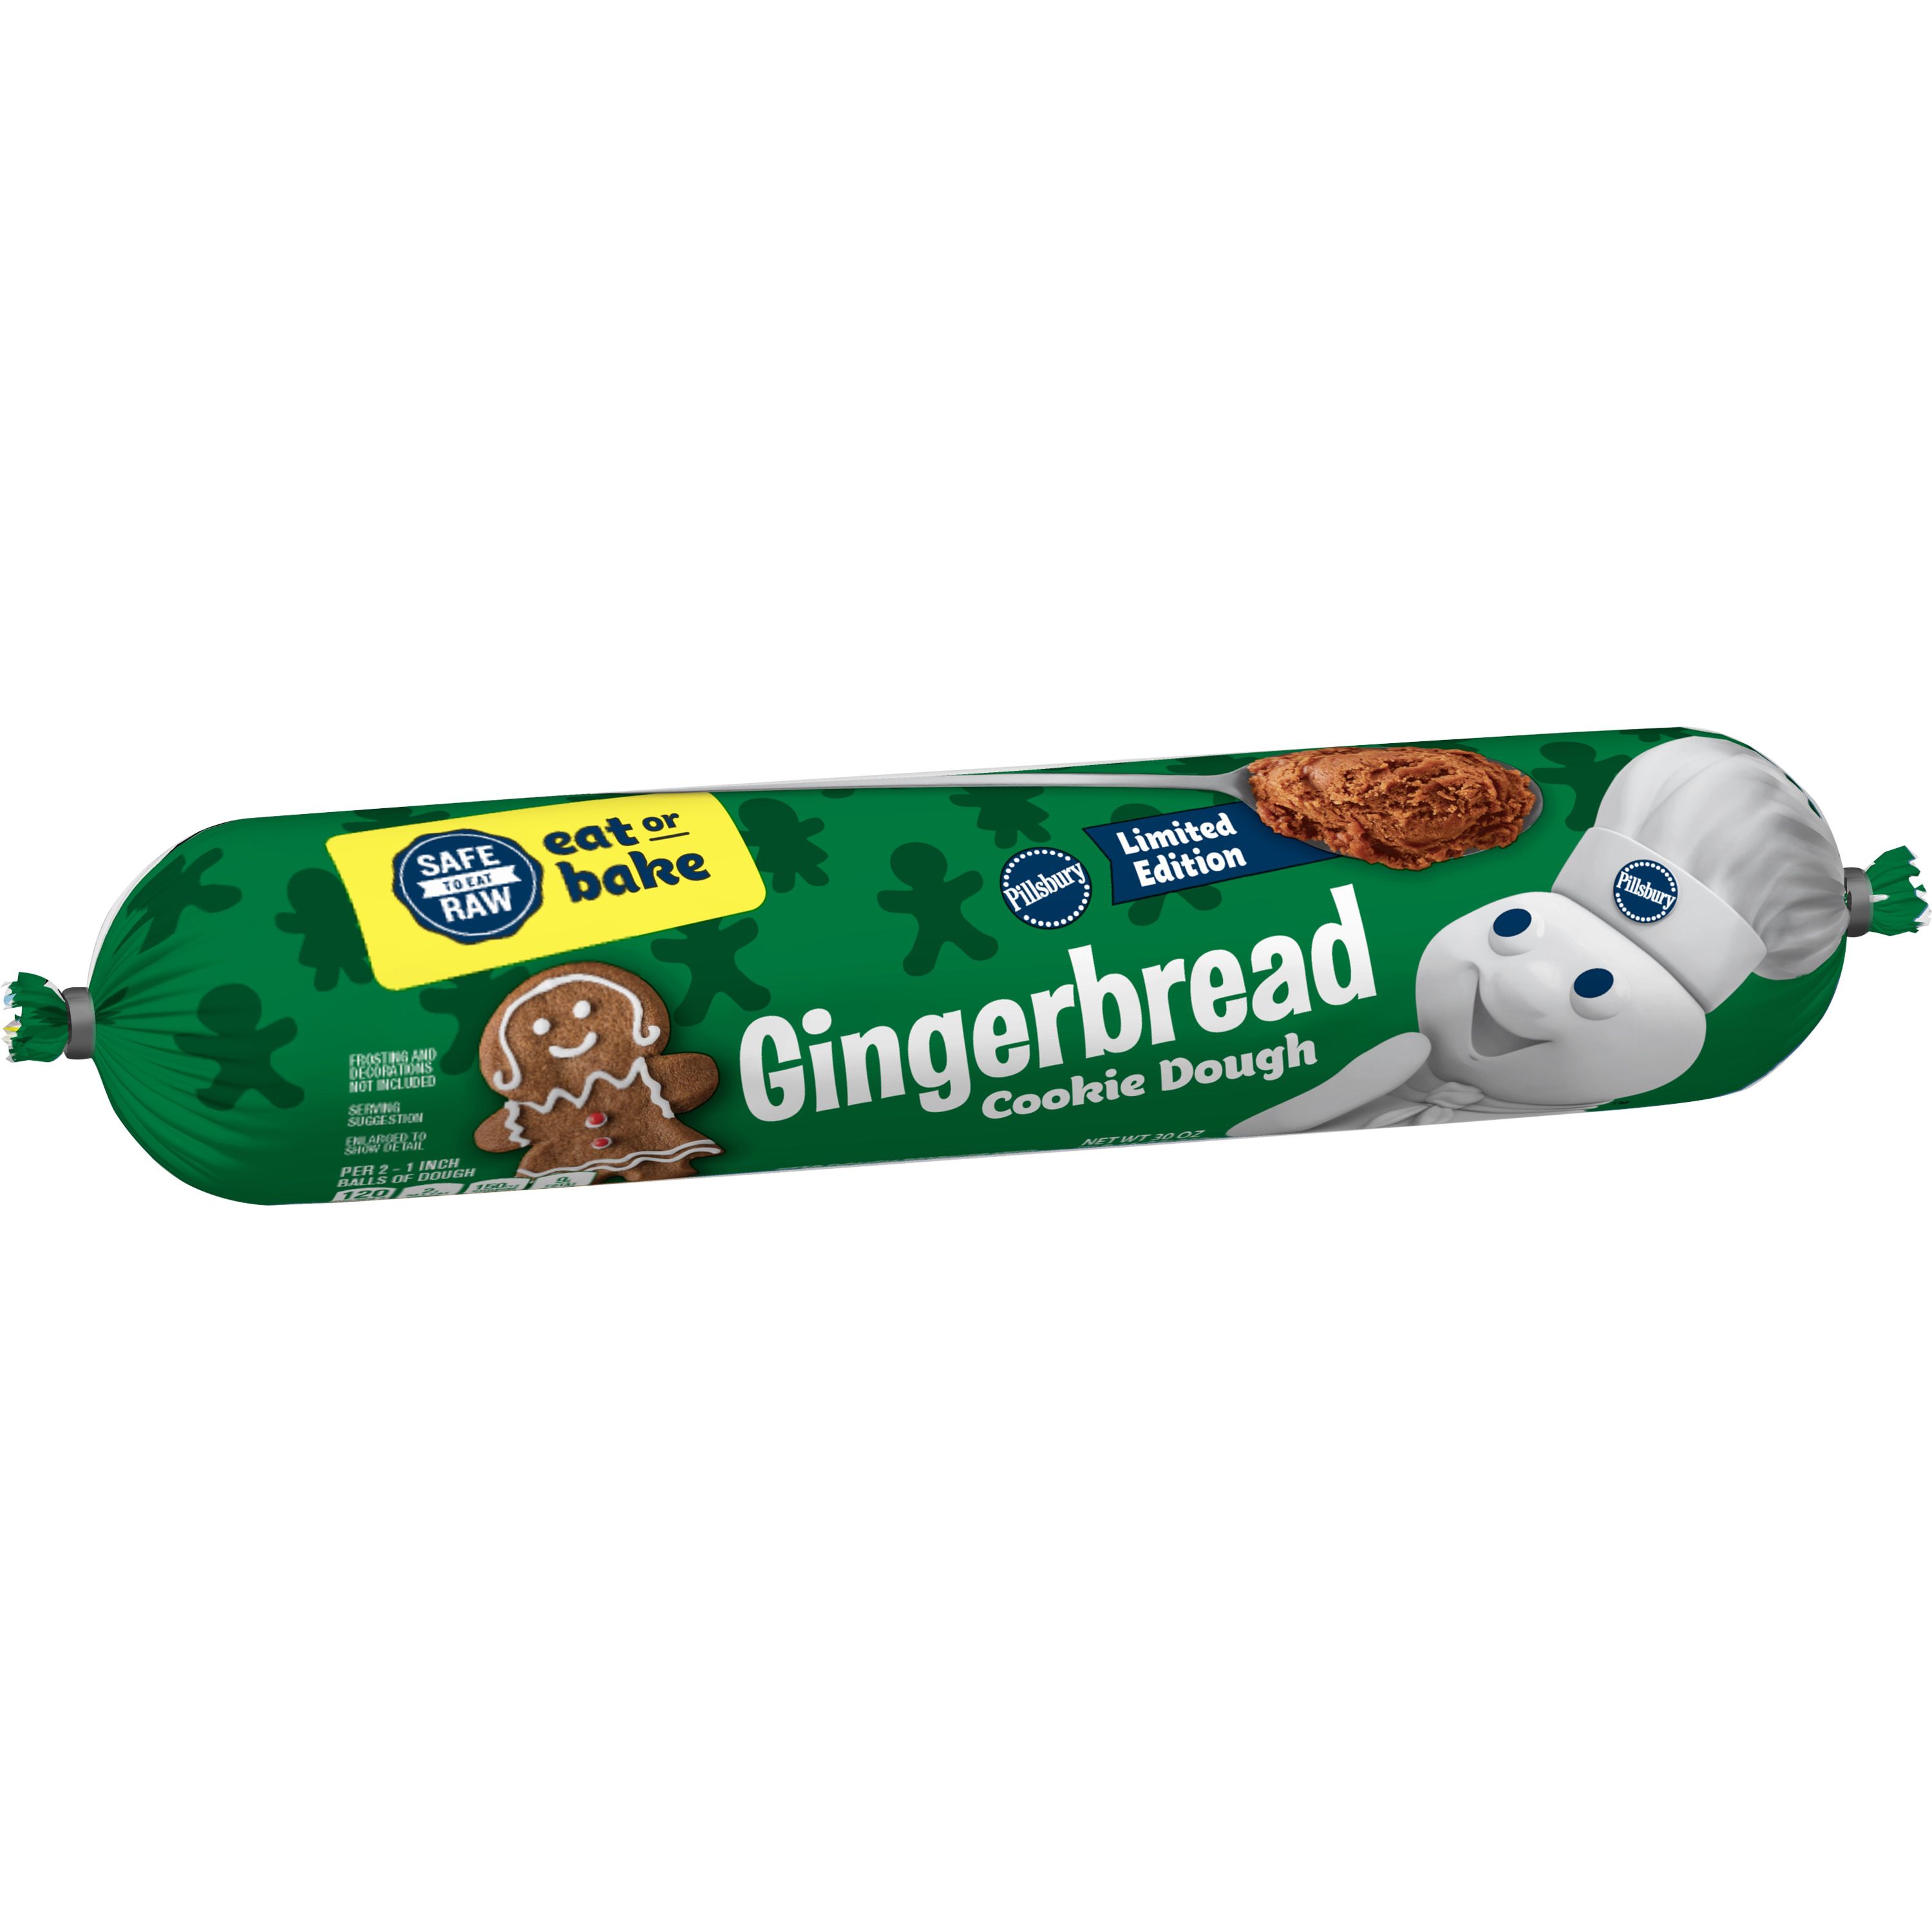 Pillsbury Will Be Selling Gingerbread Cookie Dough This Holiday Season